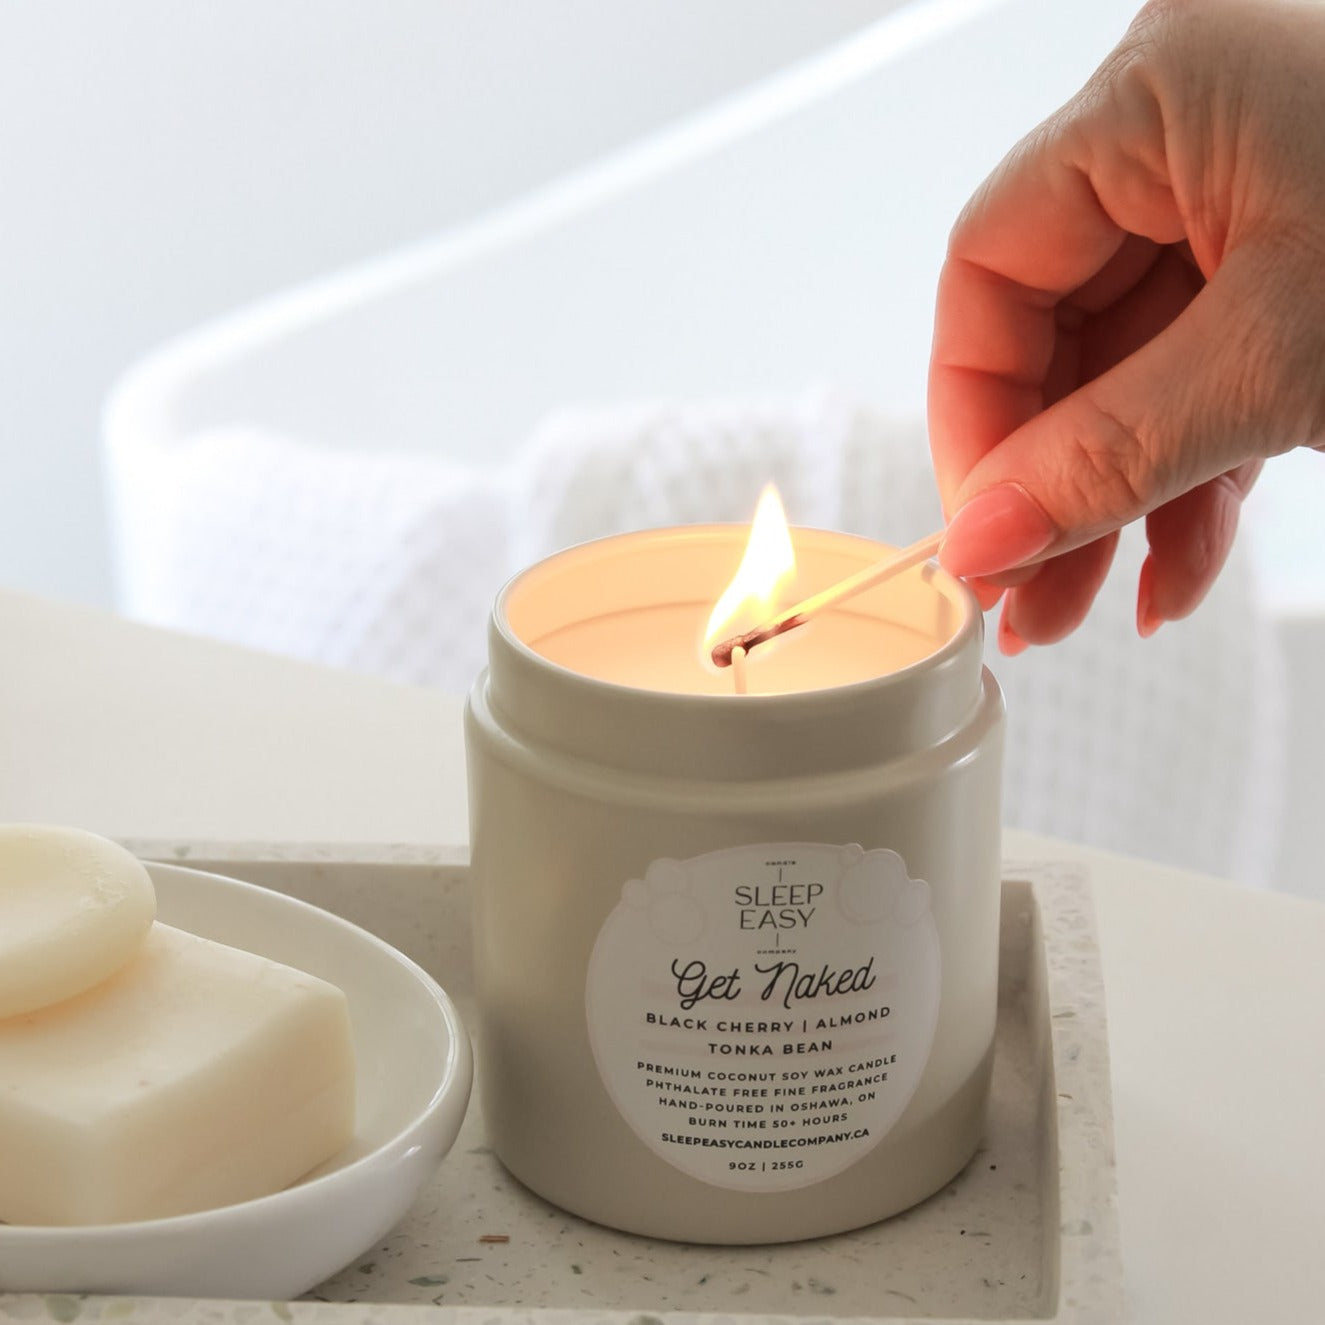 Get Naked Coconut Soy Candle is displayed in a bathroom on a ceramic dish. A woman is lighting the candle with a matchstick. 